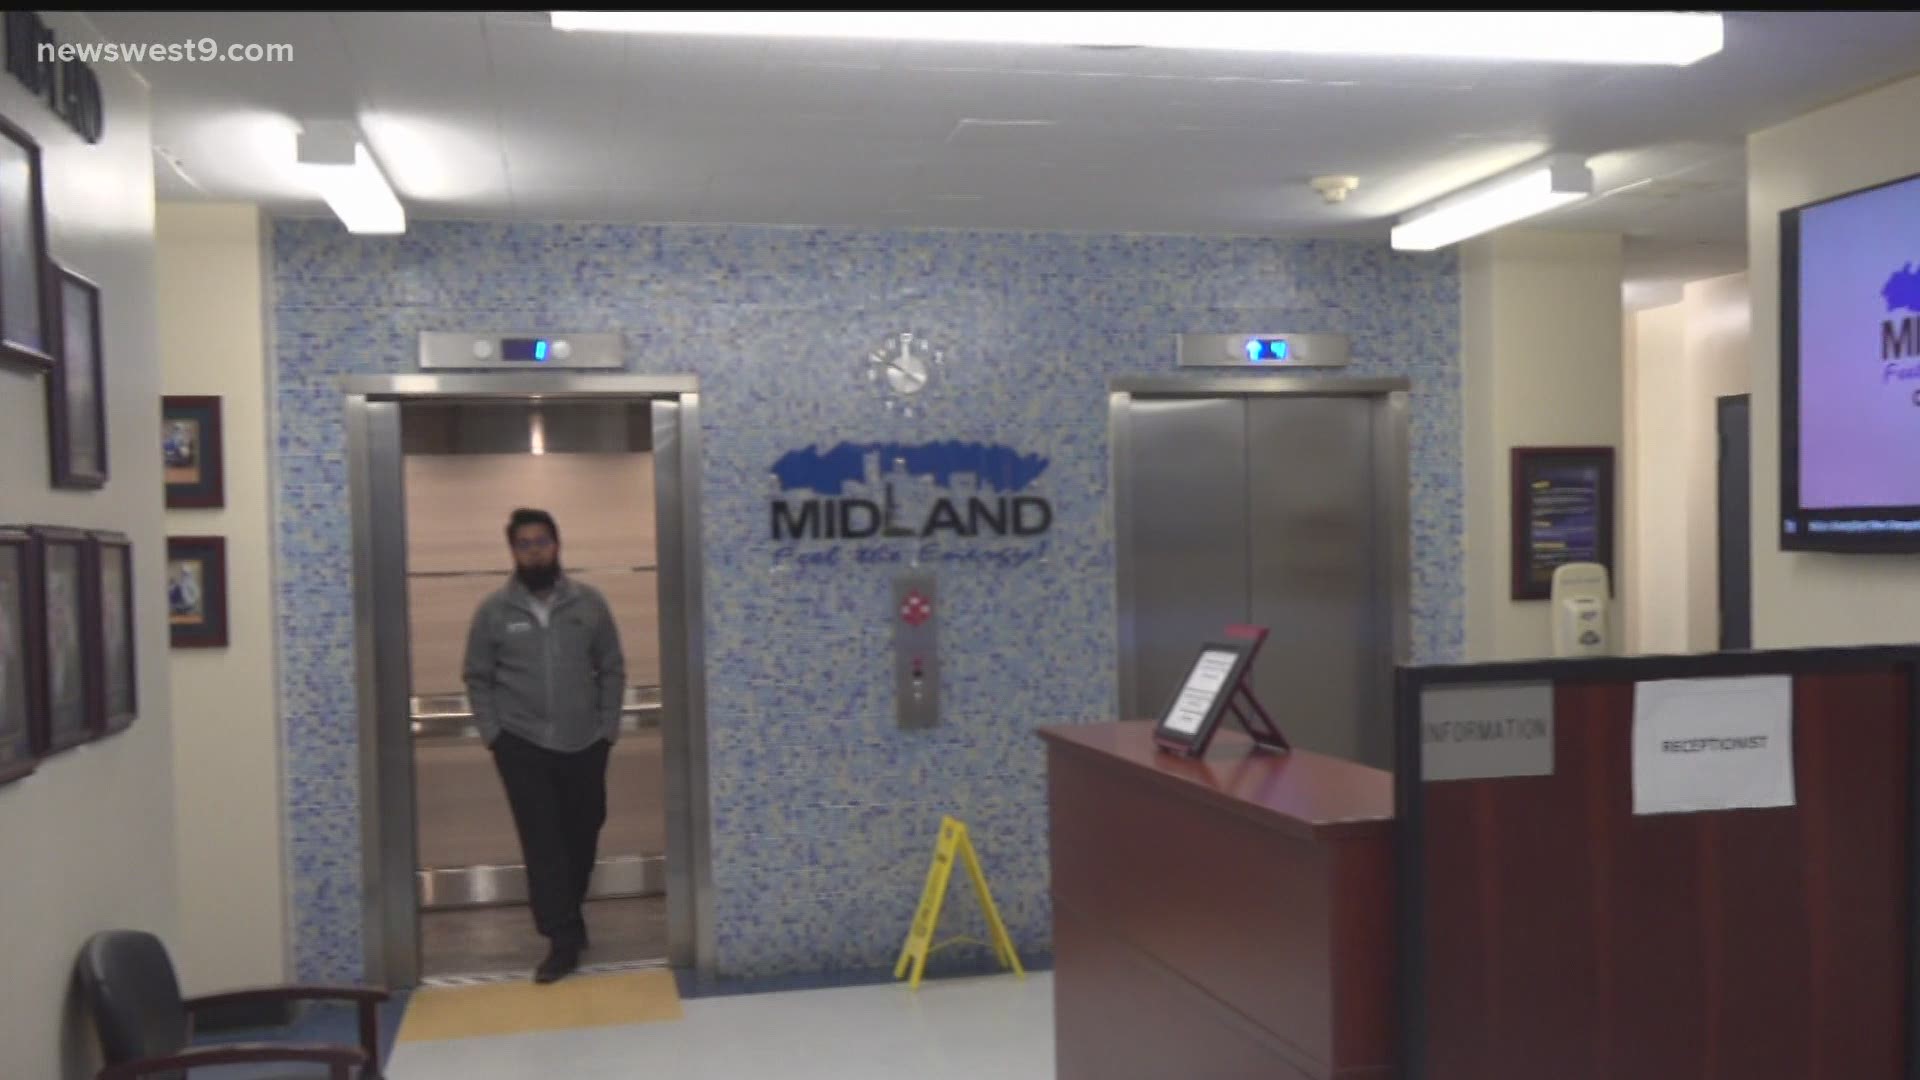 The City of Midland has announced that will be closed to the public starting Oct. 26.